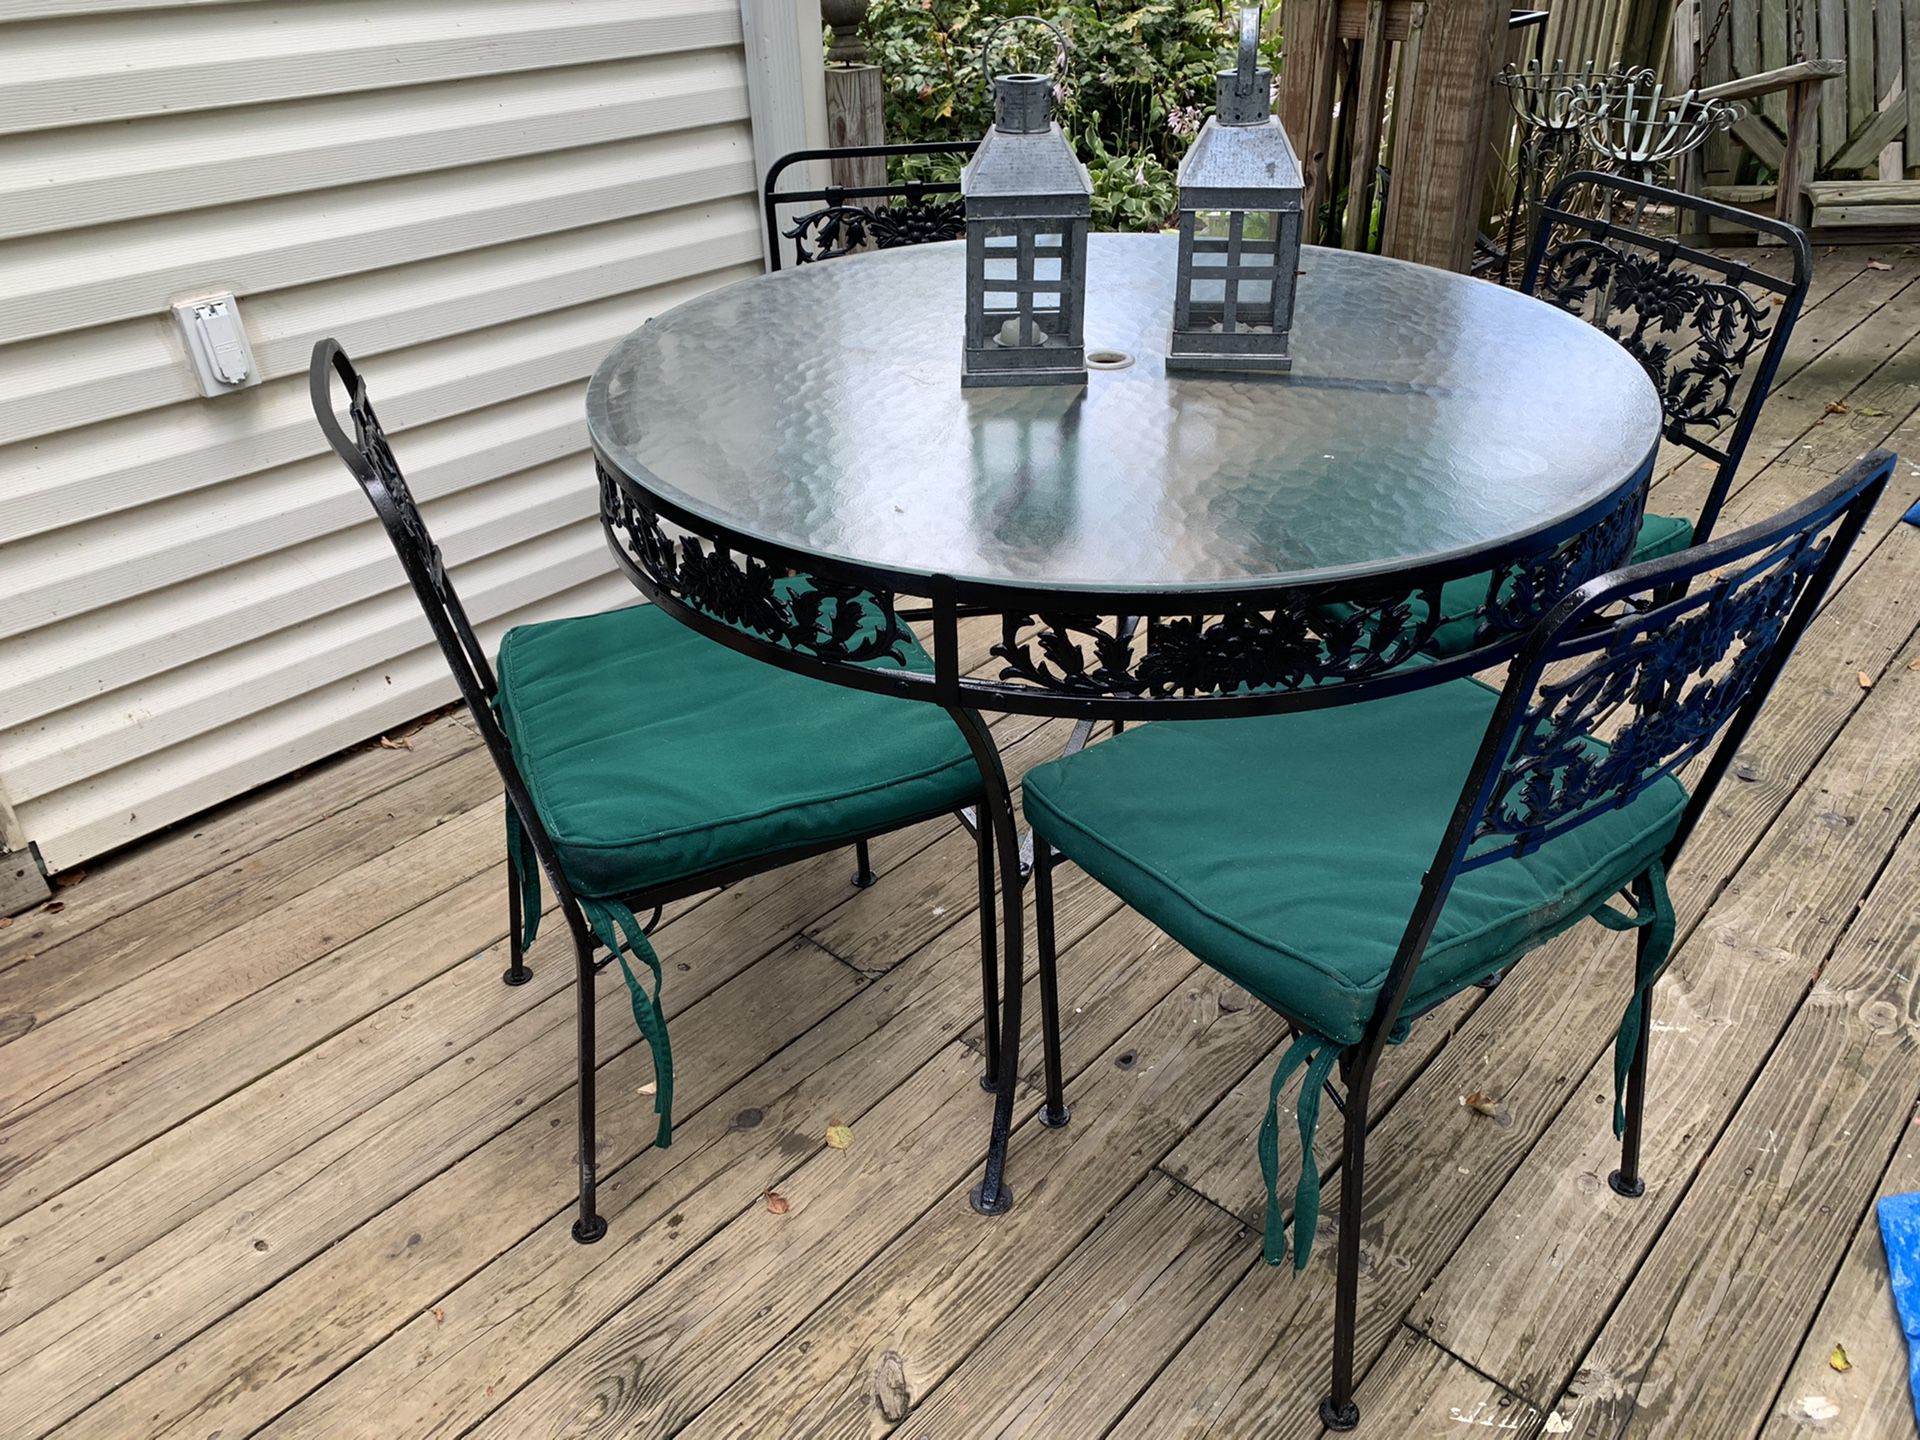 Freshly Vintage Painted Cast Iron set with glass Top Table.